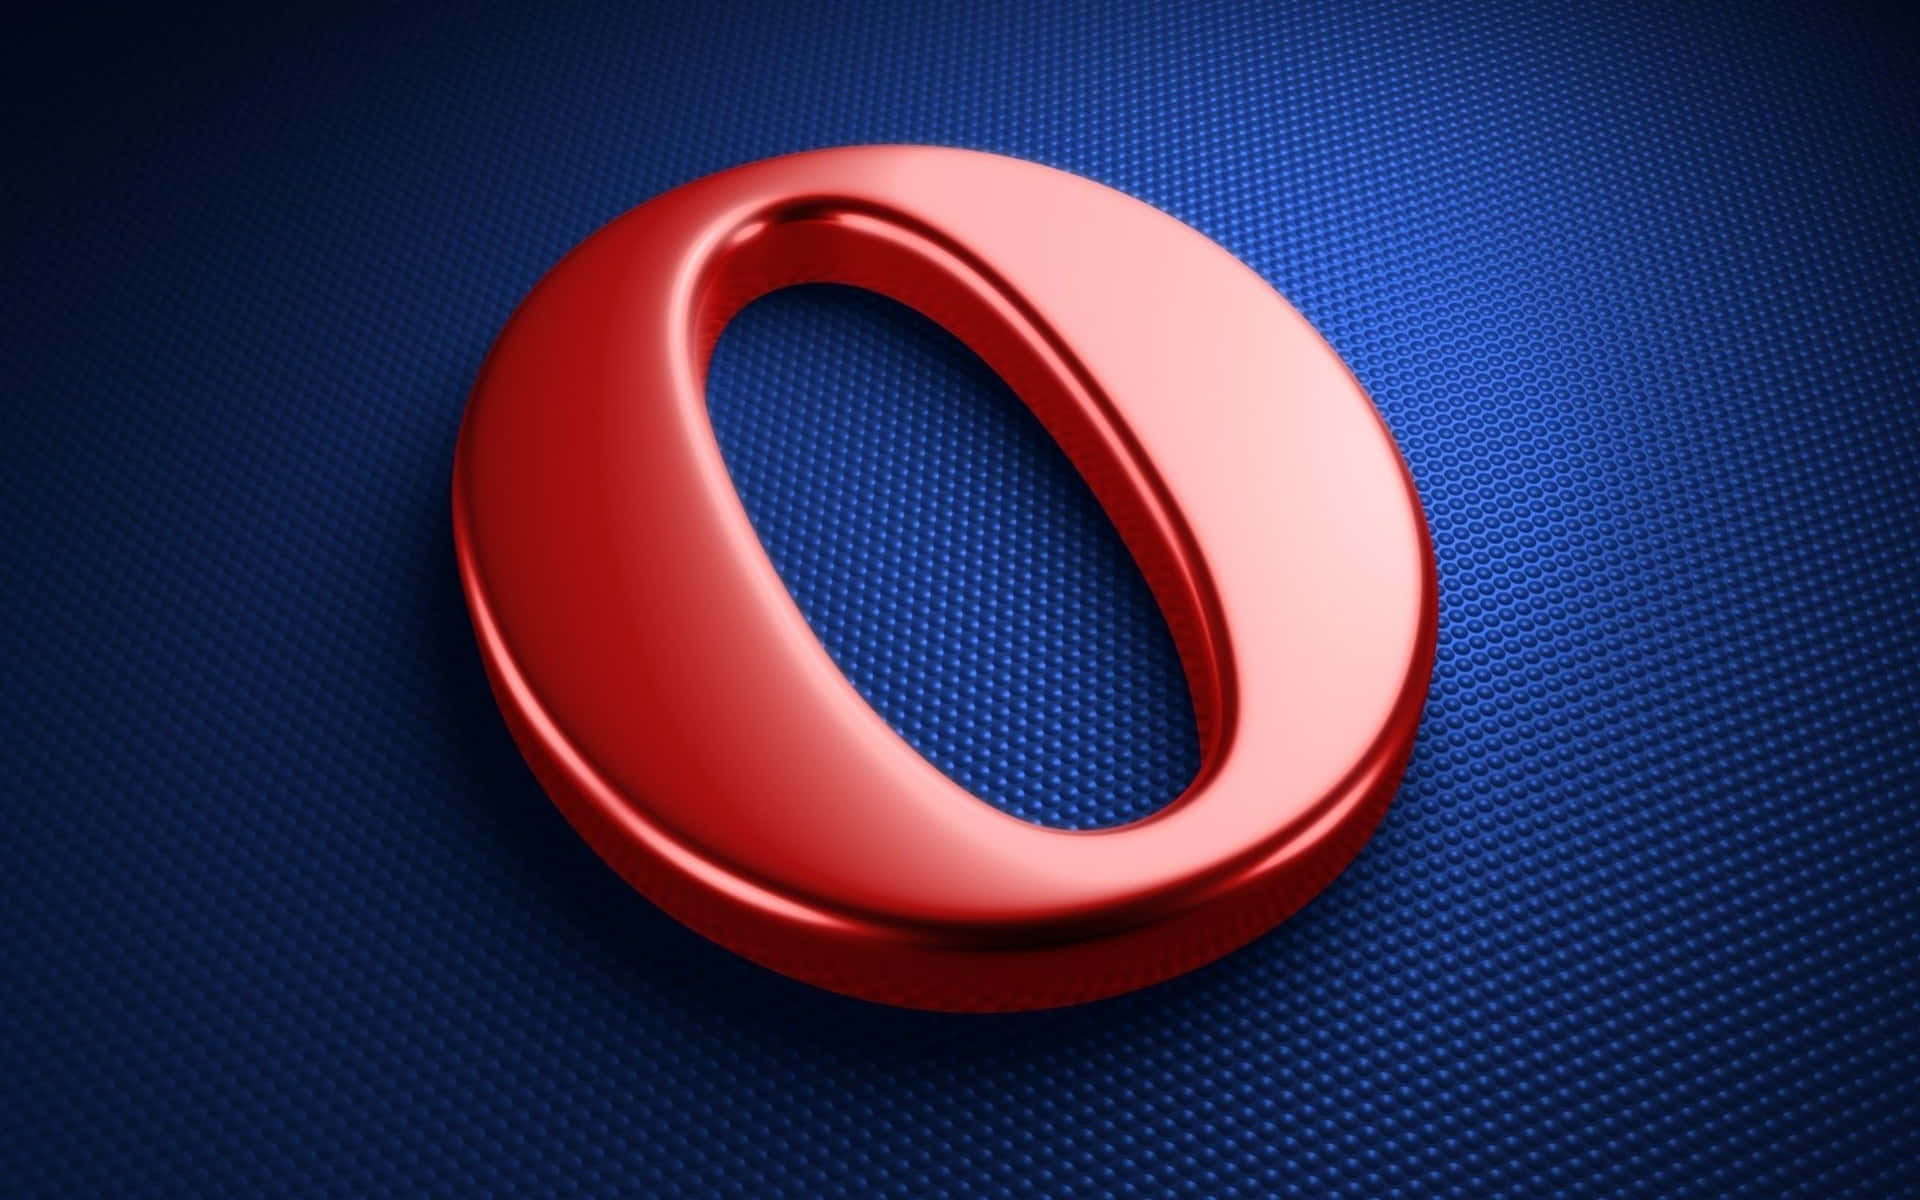 A Red Letter O On A Blue Background Wallpaper